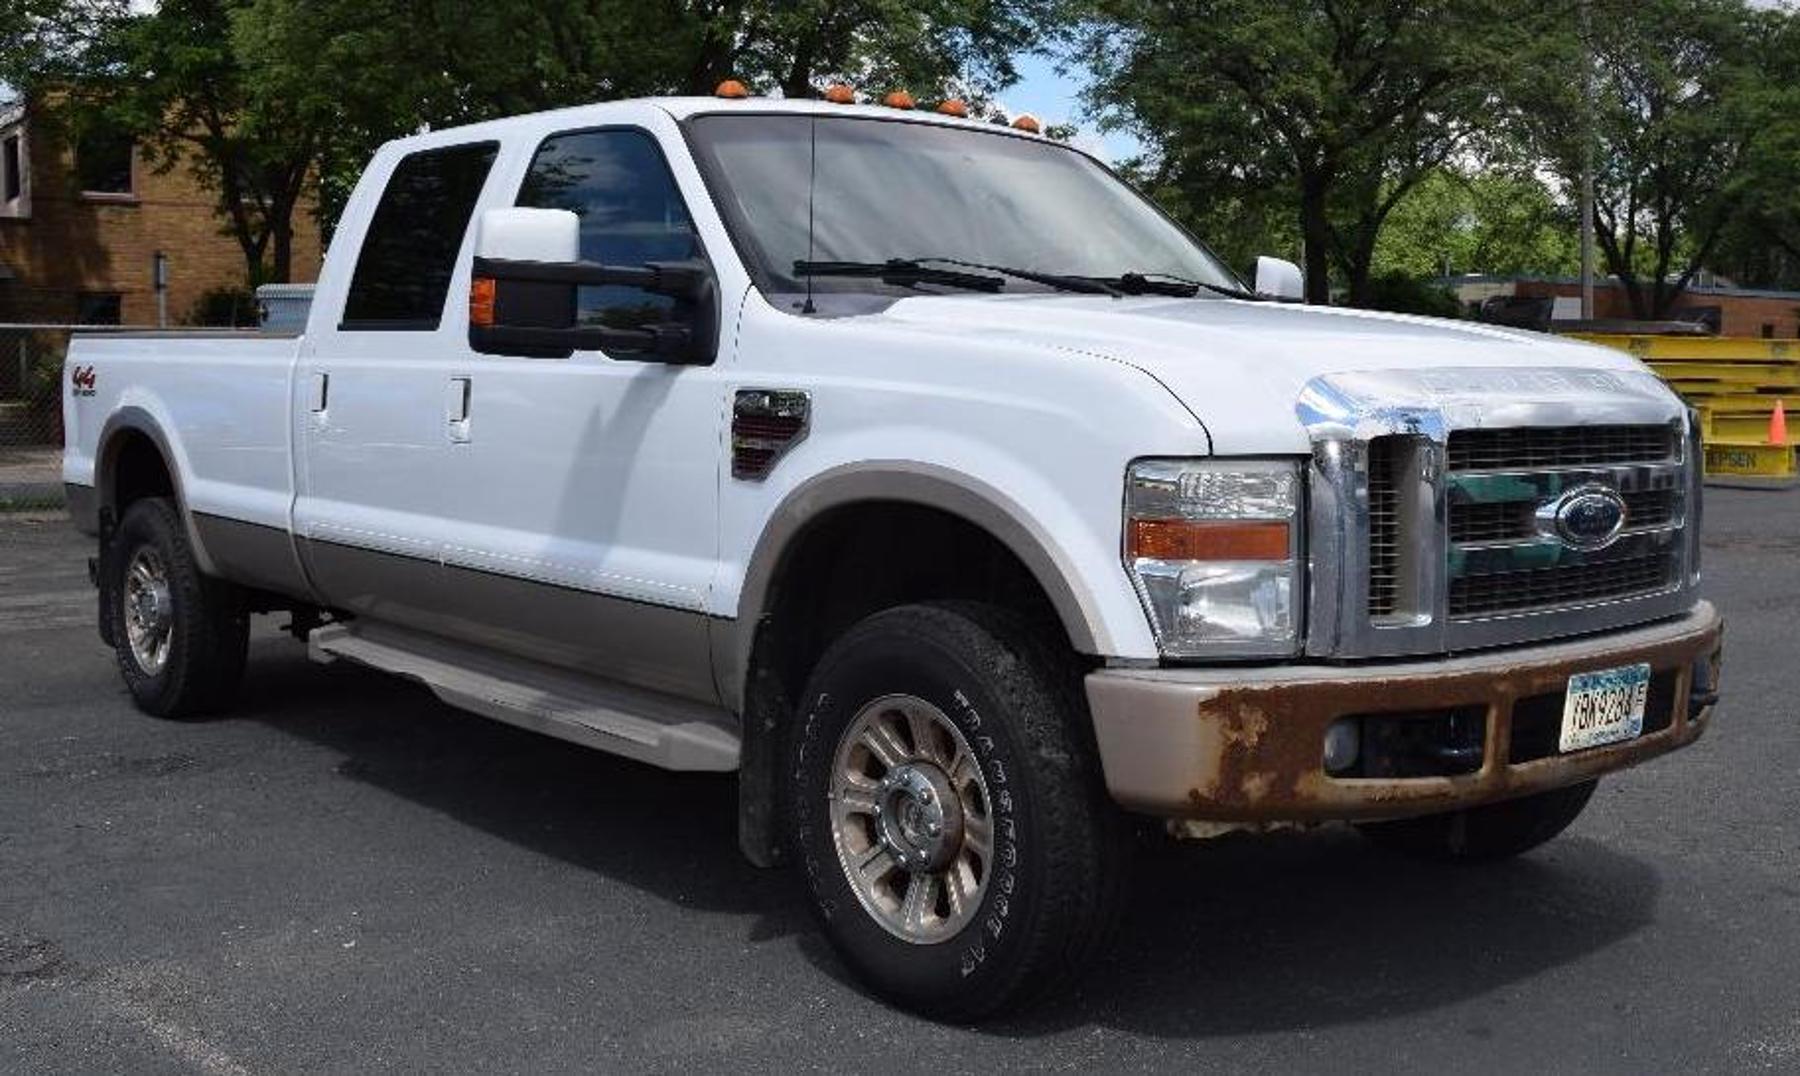 Scaffolding, Planks, Screw Jacks and 2008 Ford F-350 Lariat Super Duty